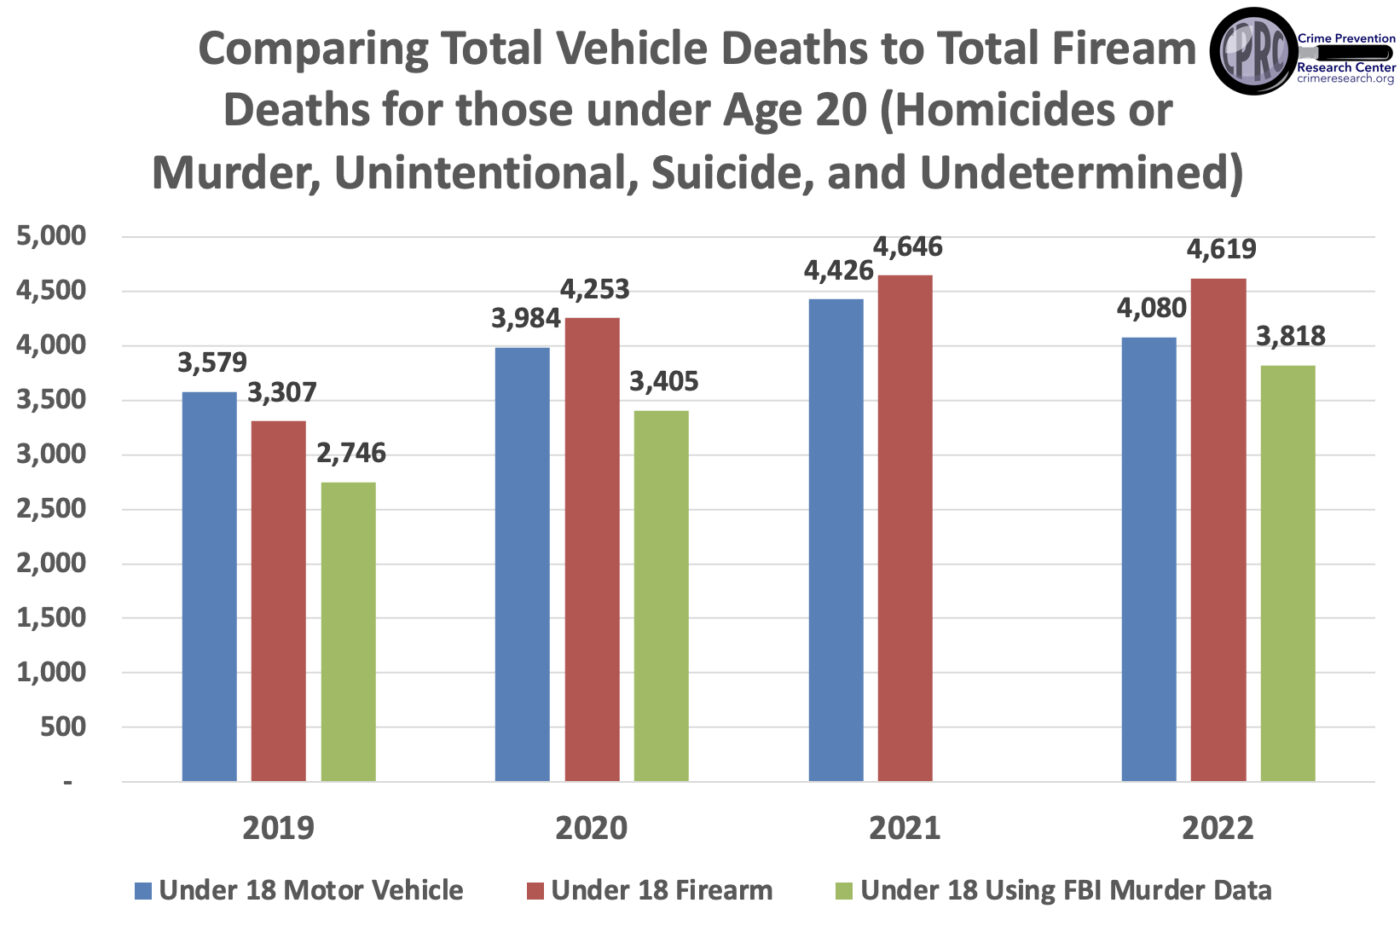 The continued false claim that firearms are the leading cause of death for children or teens, now from the U.S. Surgeon General Dr. Vivek Murthy